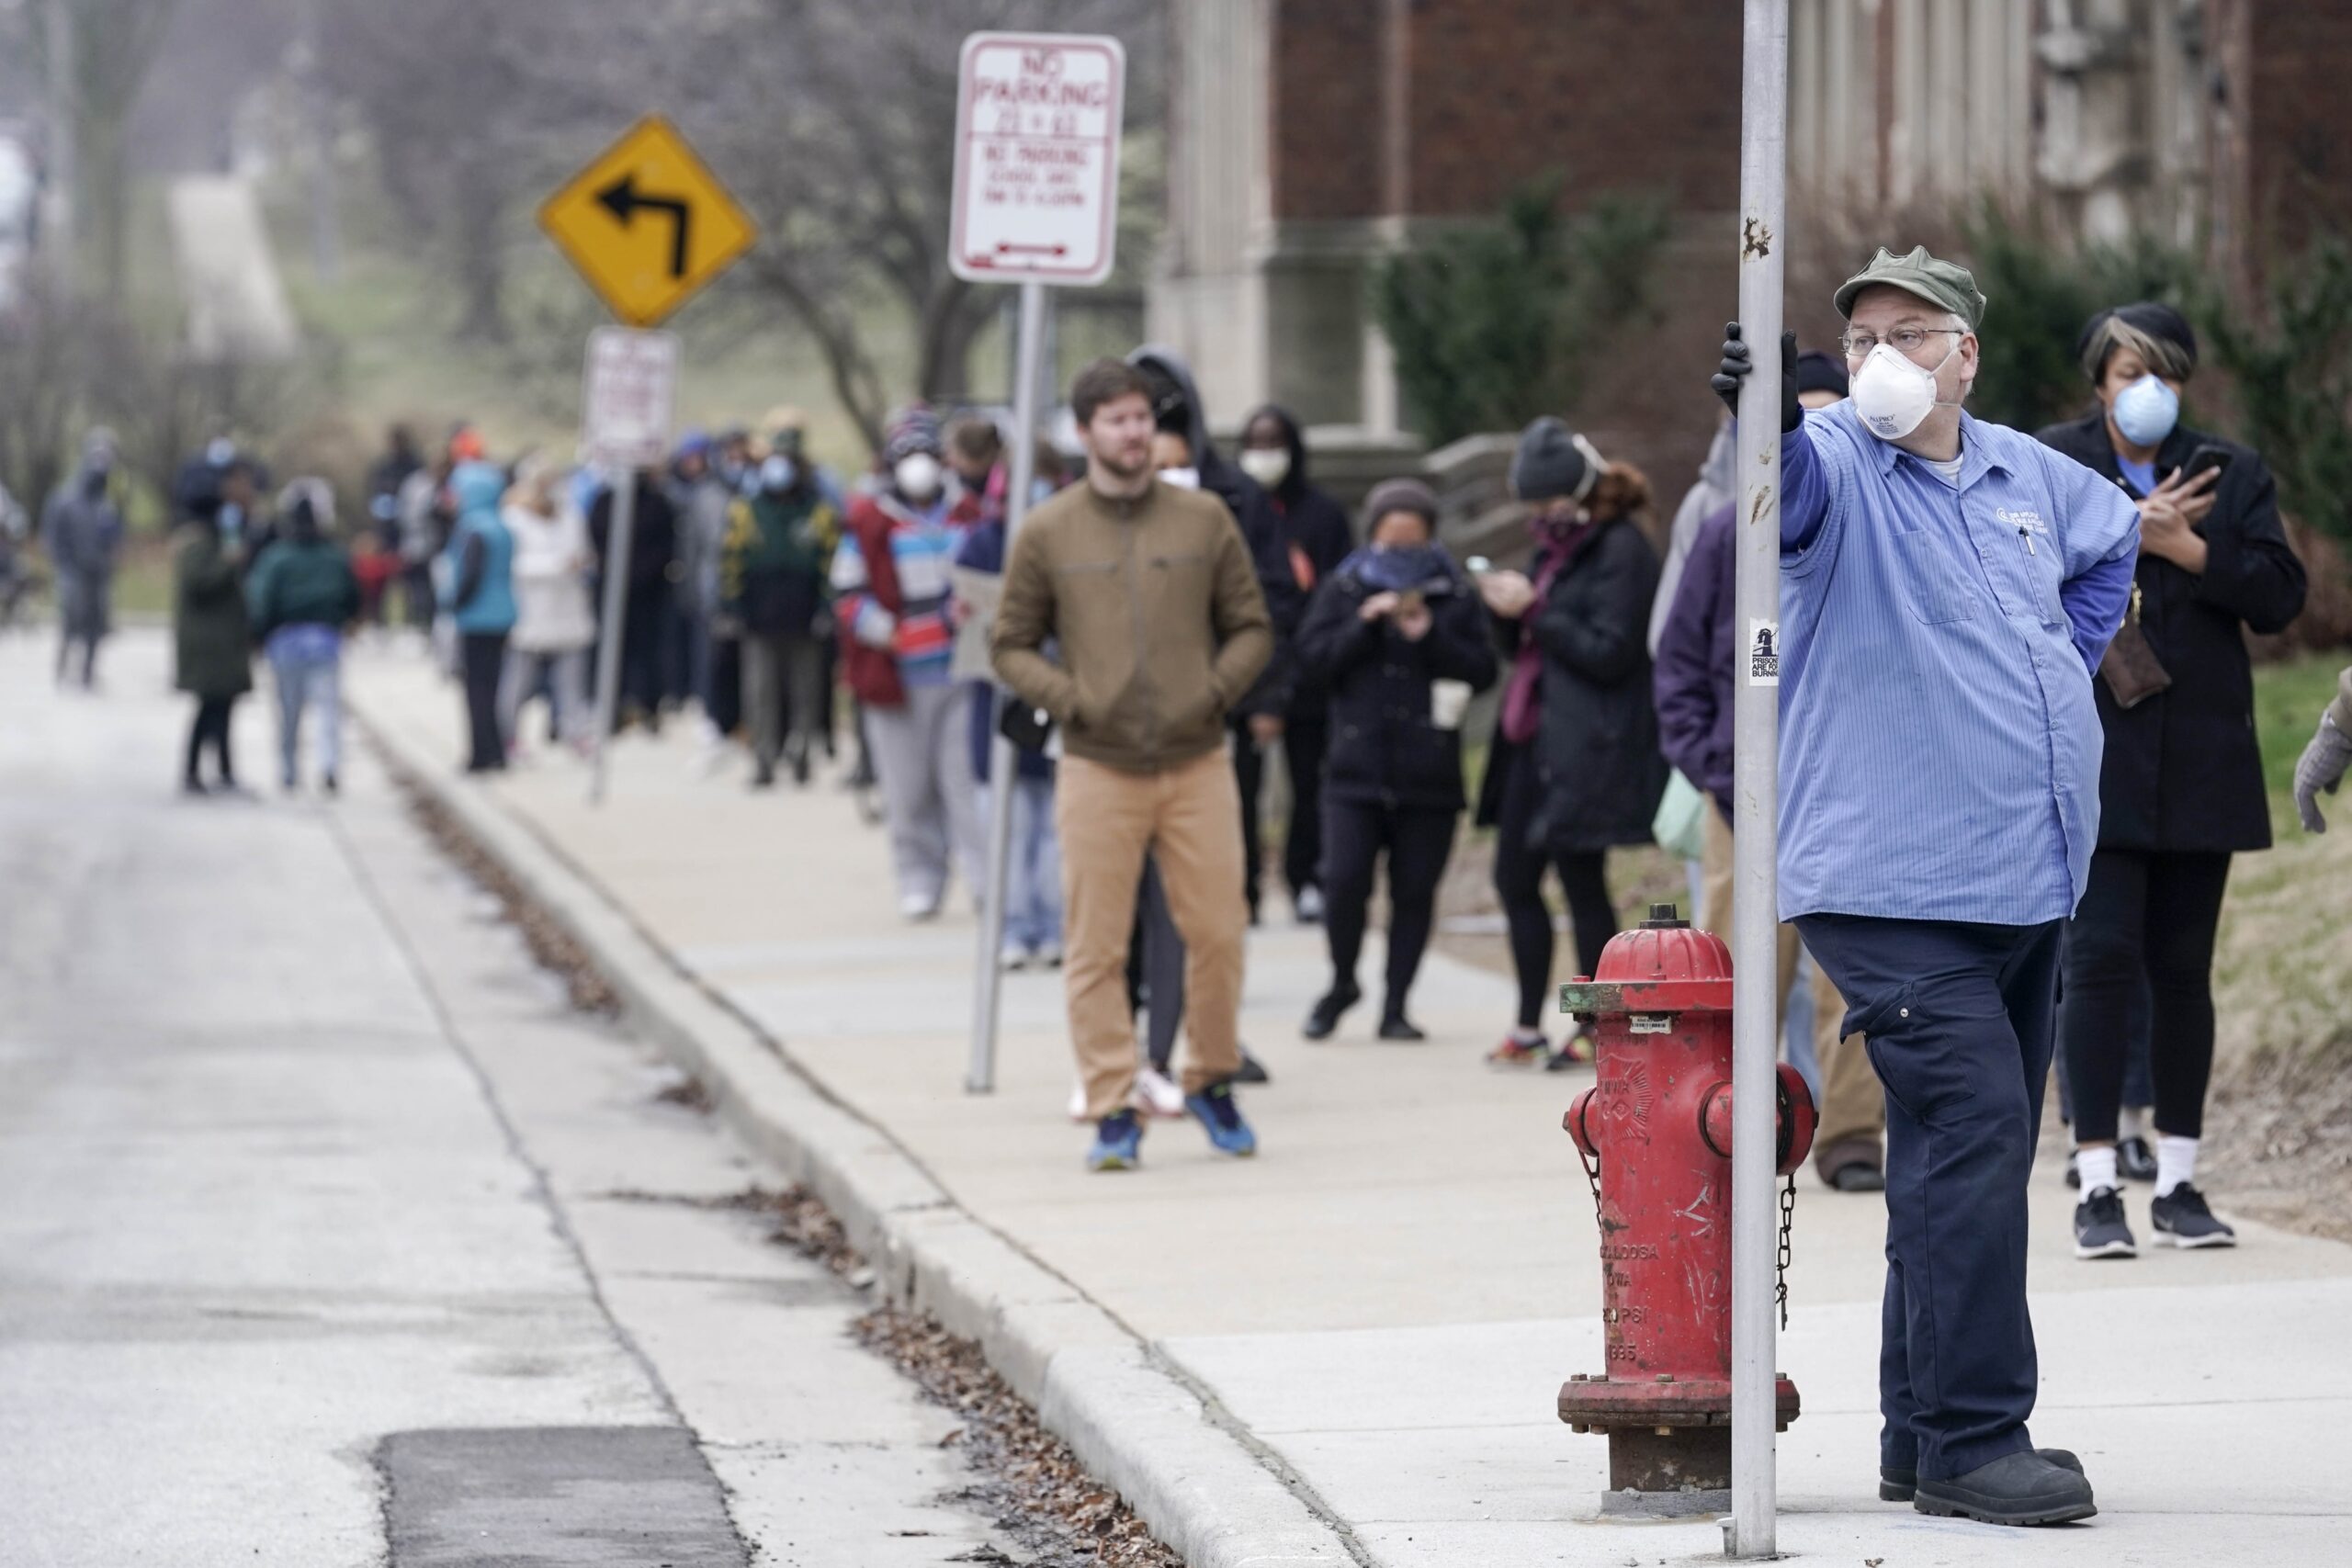 Voters masked against coronavirus line up at Riverside High School for Wisconsin's primary election